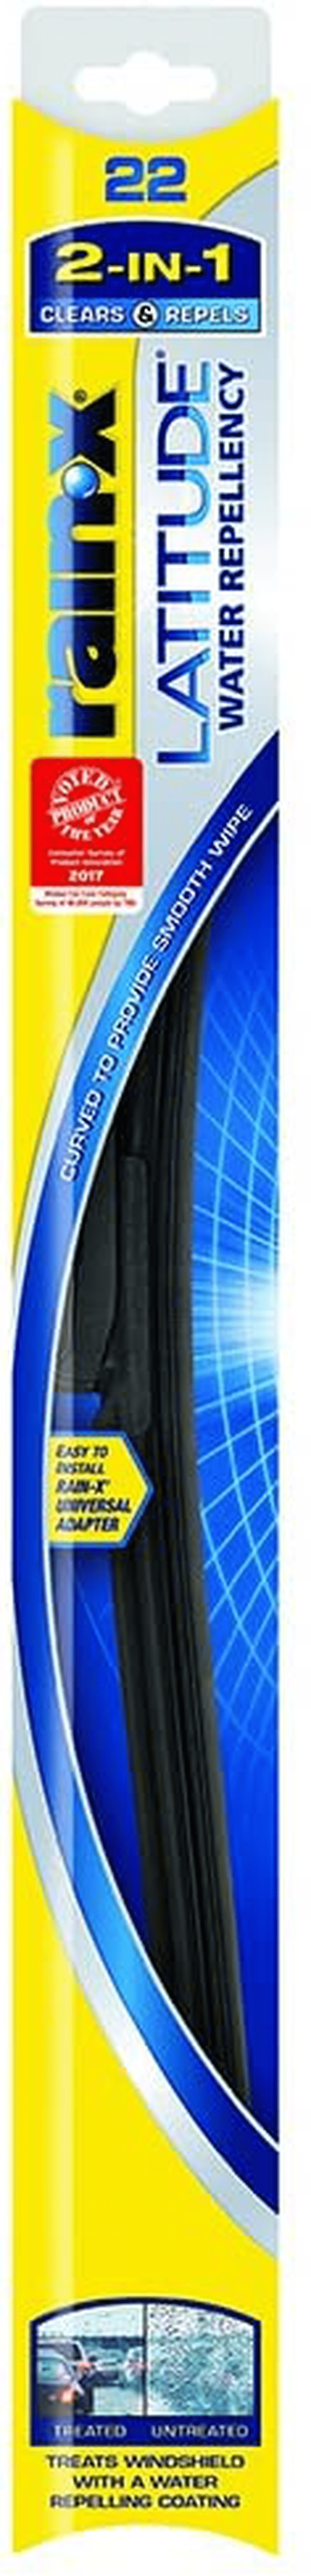 Rain-X - 810163 Latitude Water Repellency Wiper Blade Combo Pack 26" and 16" Vehicles & Parts > Vehicle Parts & Accessories > Motor Vehicle Parts Rain-X Pack of 1 22" 